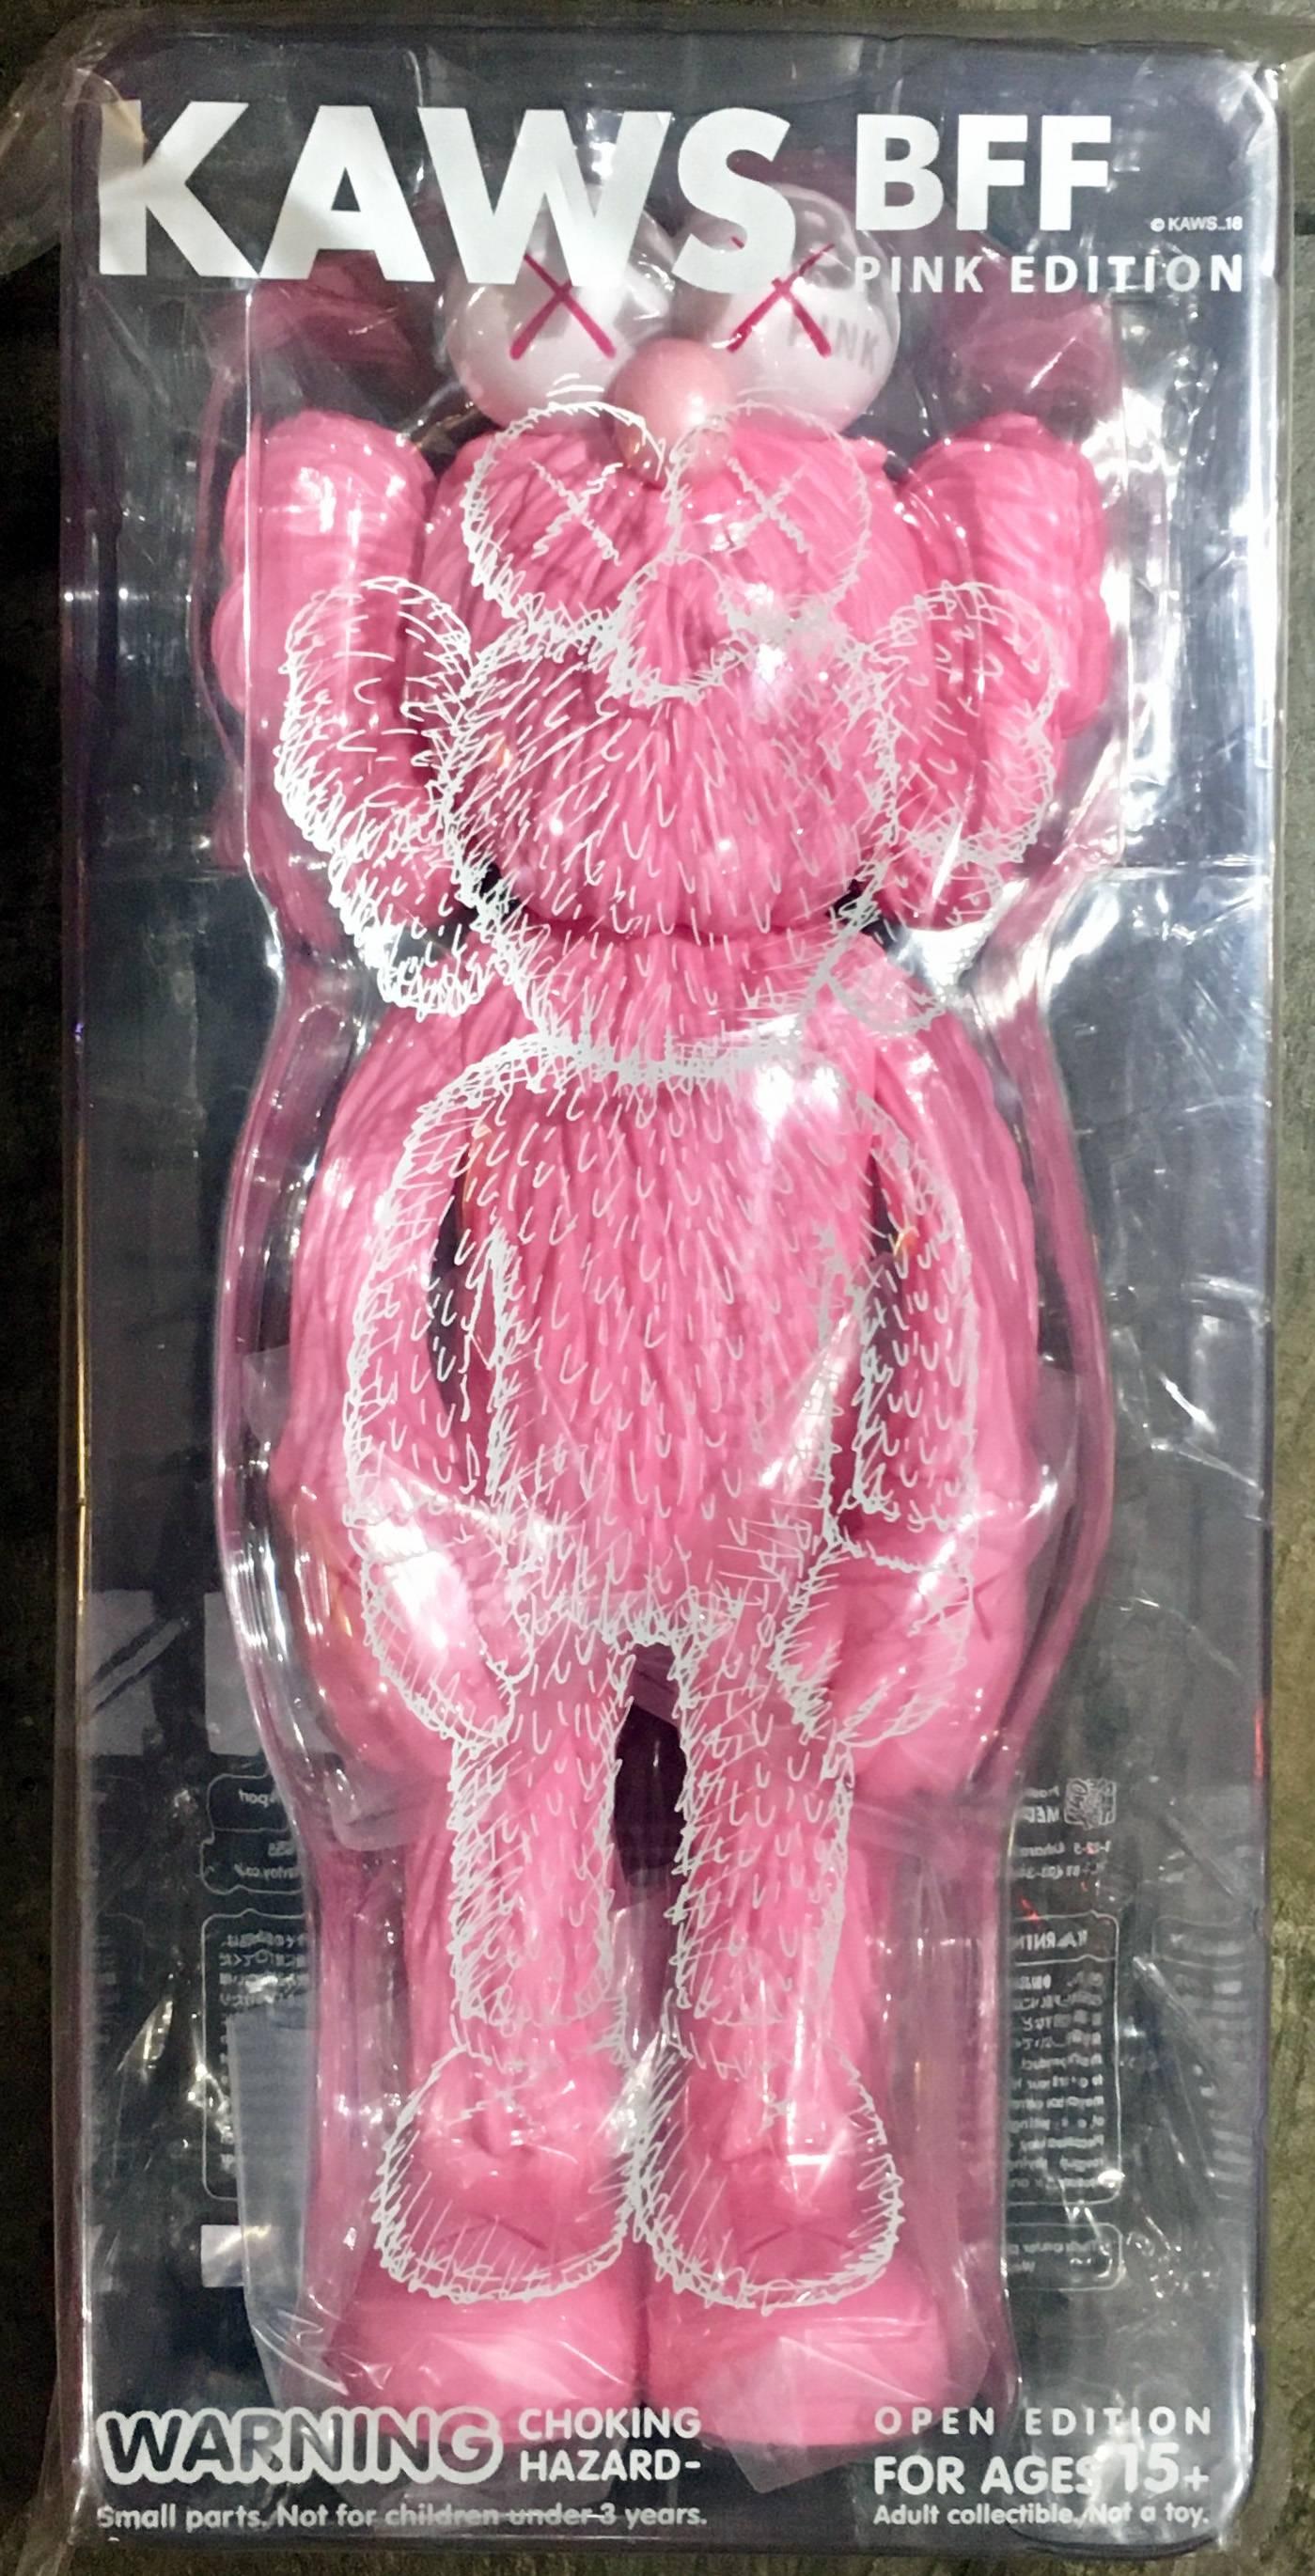 Rare KAWS BFF Pink new, unopened in its original packaging. 
A well-received work and variation of Kaws' large scale BFF sculpture is in Los Angeles's Playa Vista neighborhood Completely sold out; highly collectible and quite rare in this color.